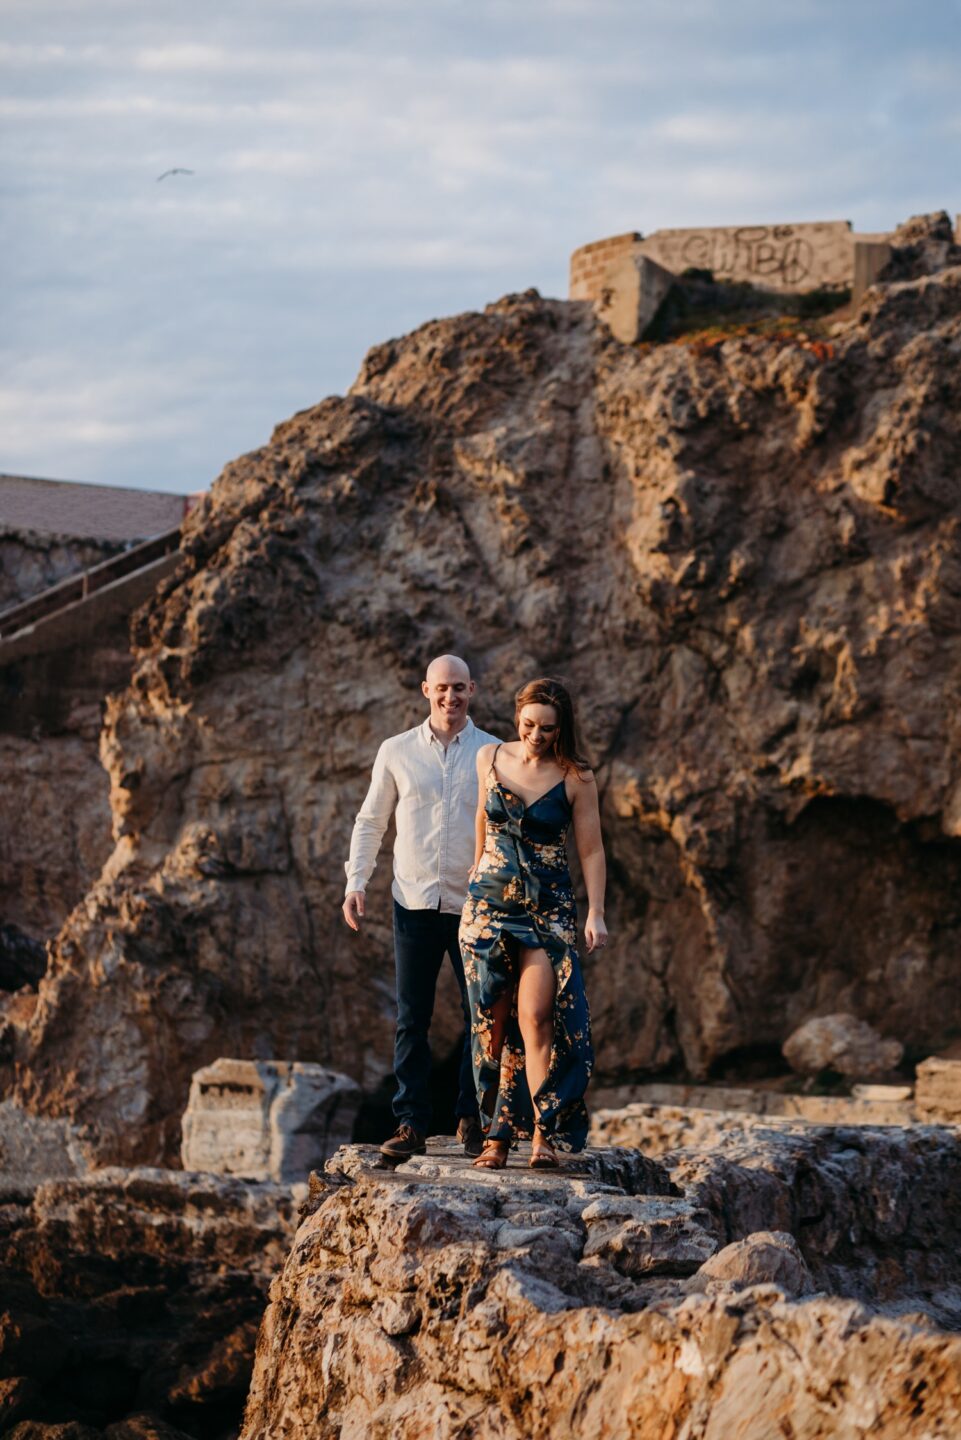 Woman leads her fiance on a rocky path during their Sutro Baths engagement photoshoot.